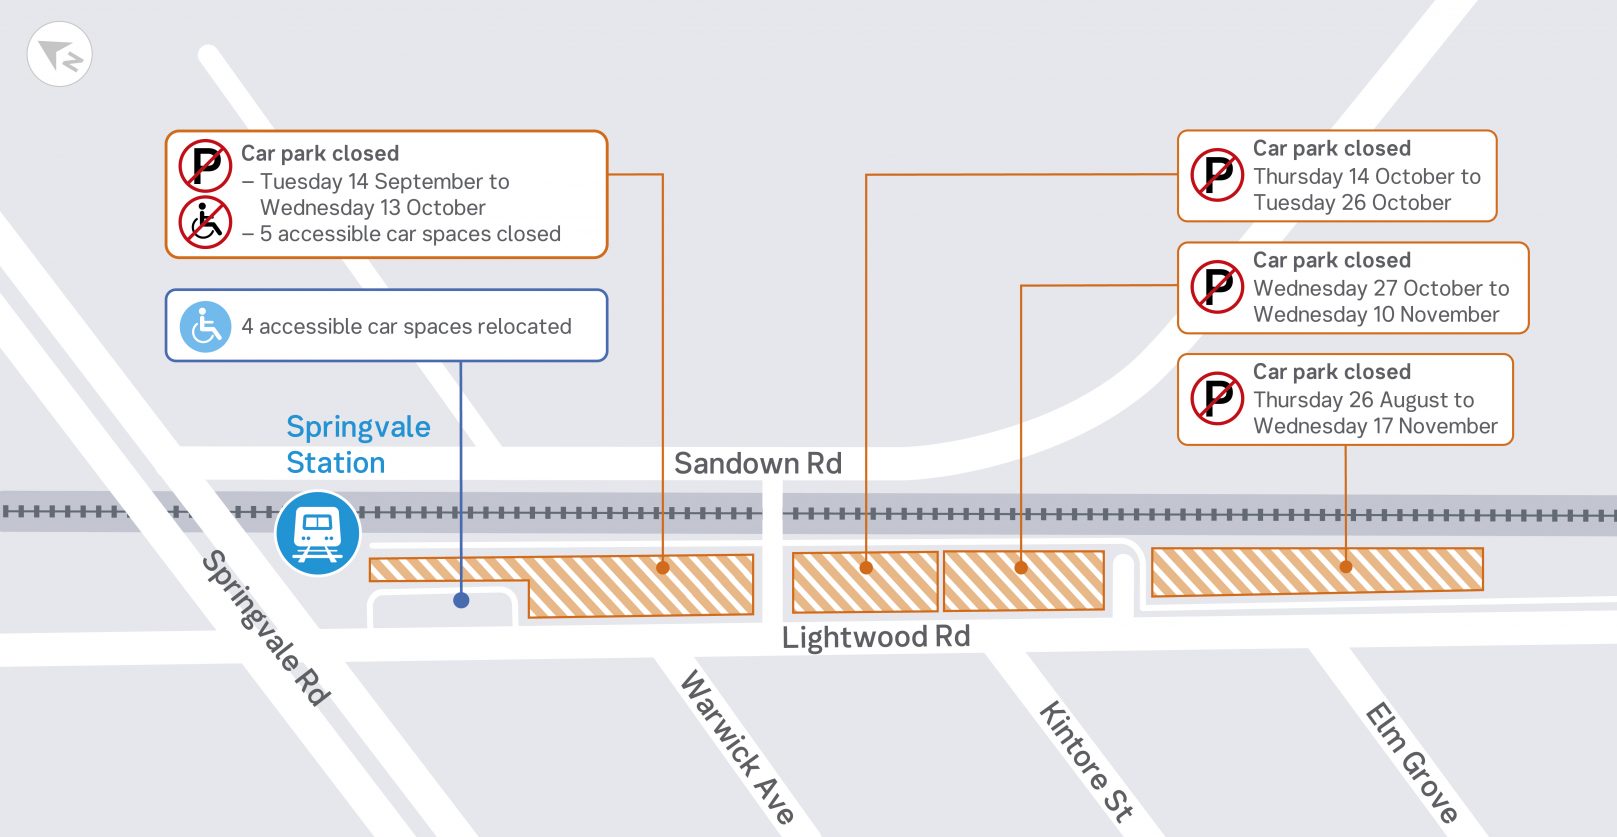 Springvale Station car space closures - click to view larger version of map